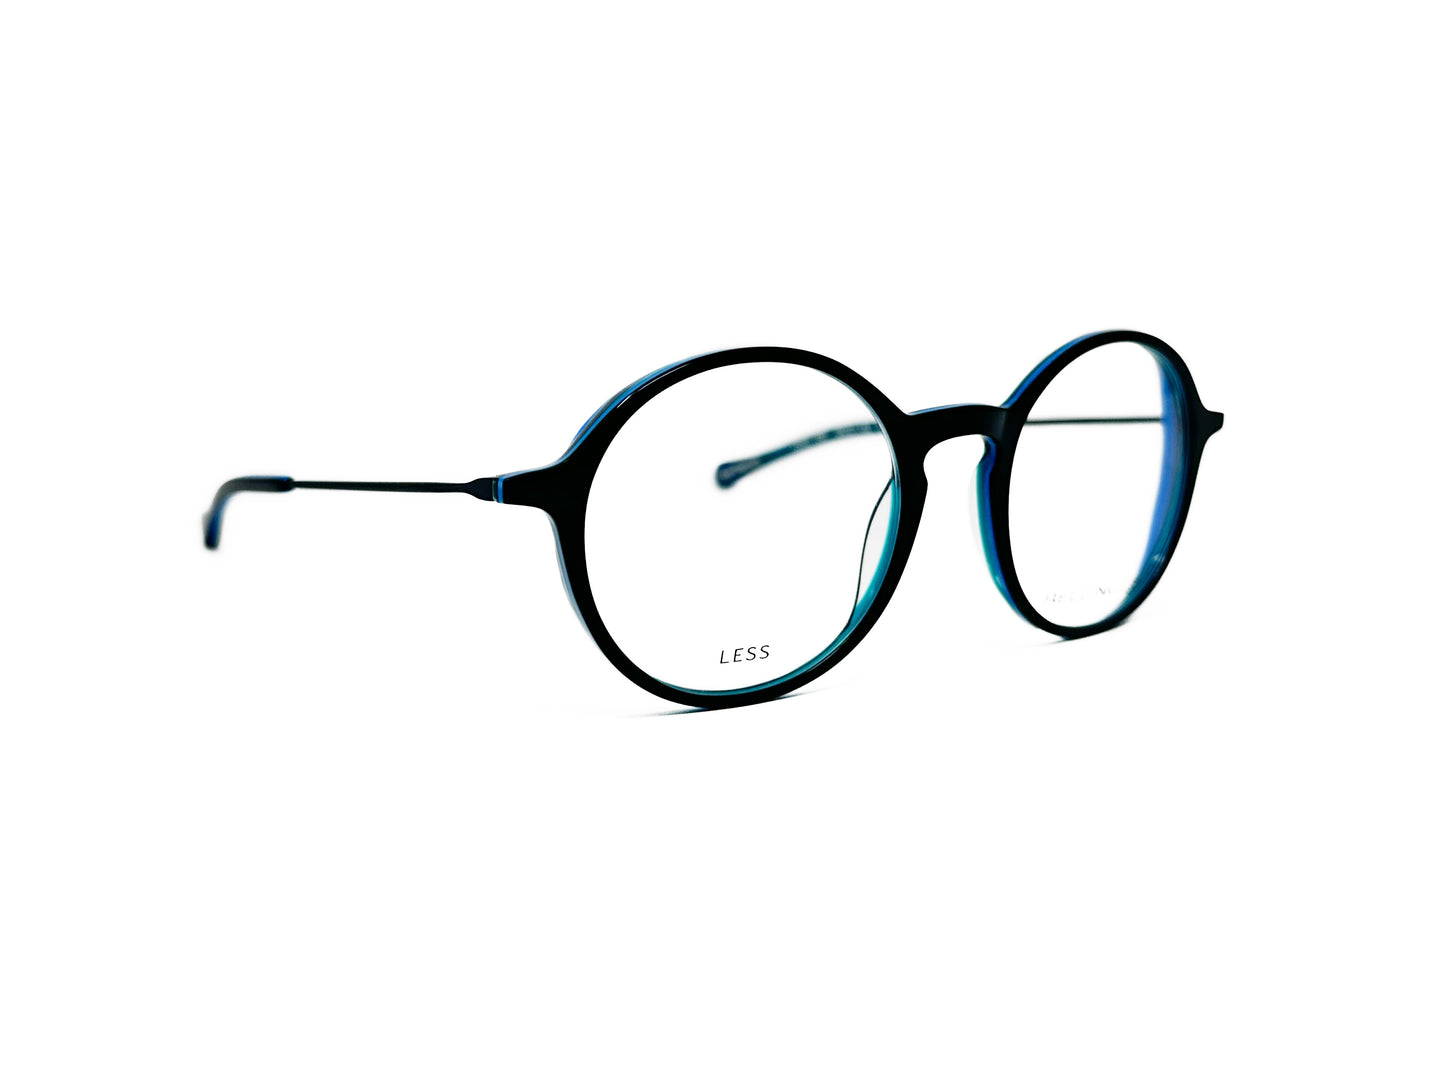 Bellinger round acetate optical frame with keyhole bridge. Model: Less 1881. Color: 442 - Black with blue accents. Side view.